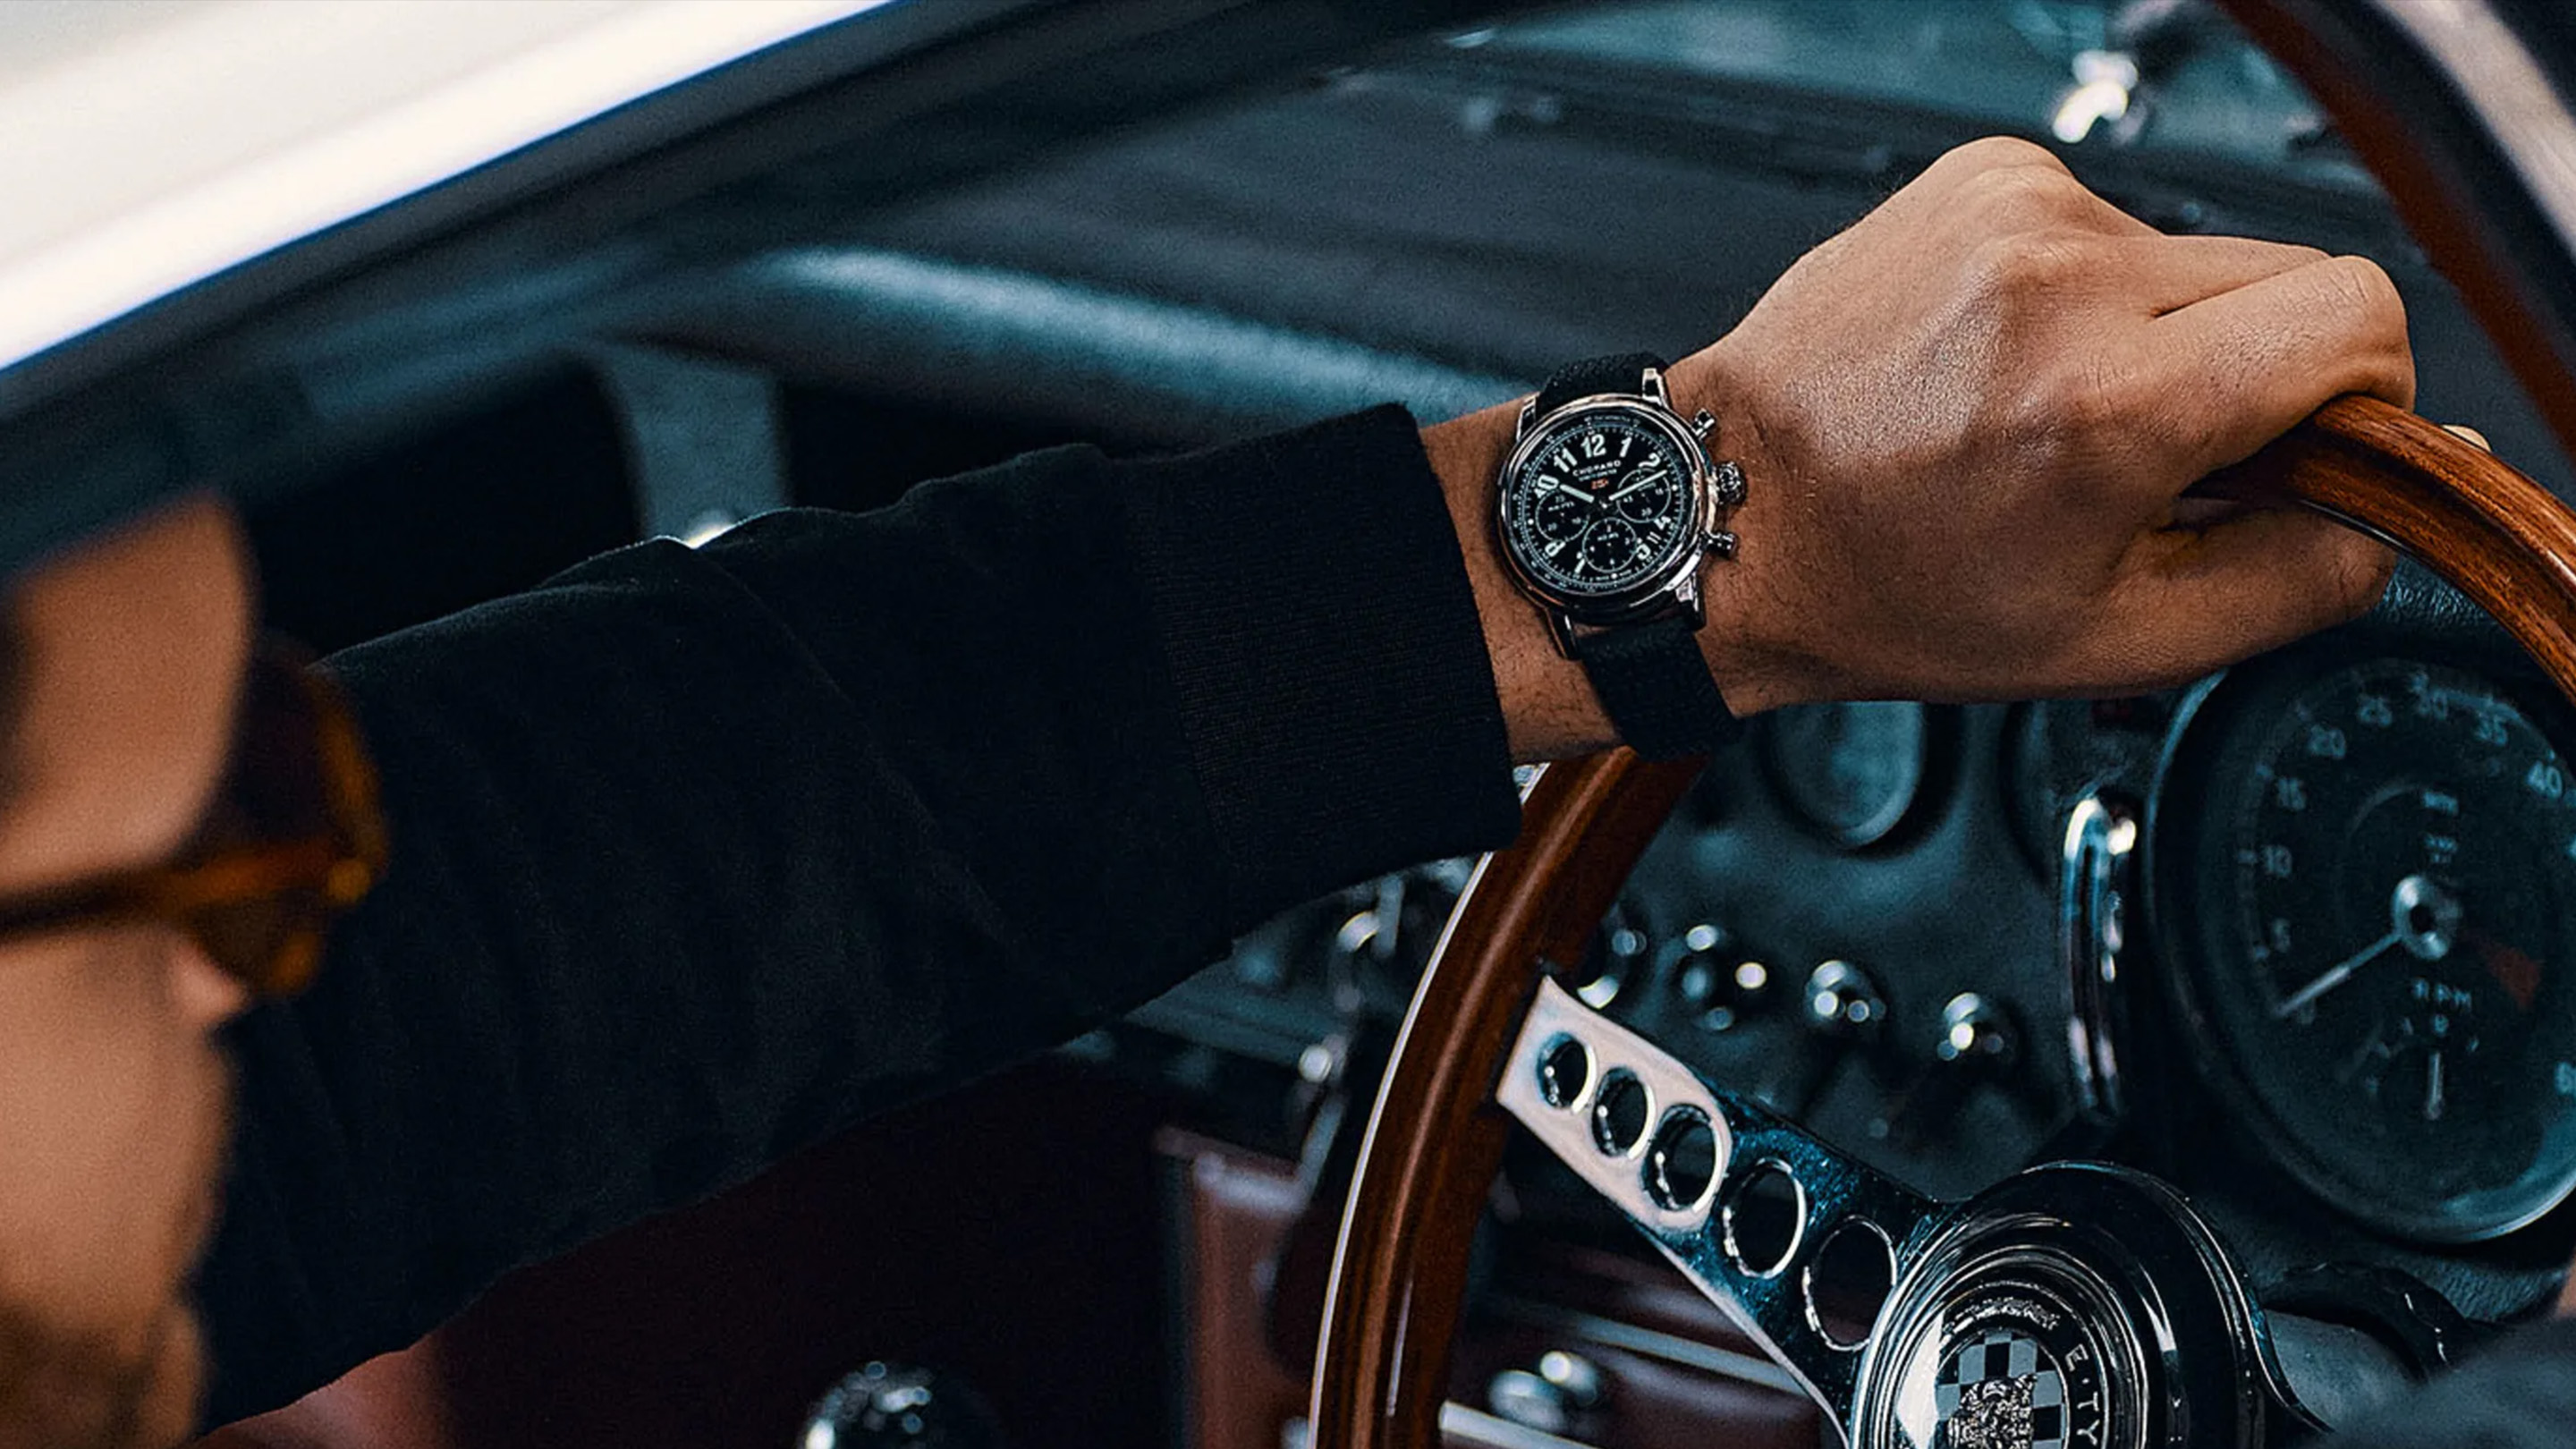 This Amazing Mechanical Watch Features A Working Speedometer - Airows